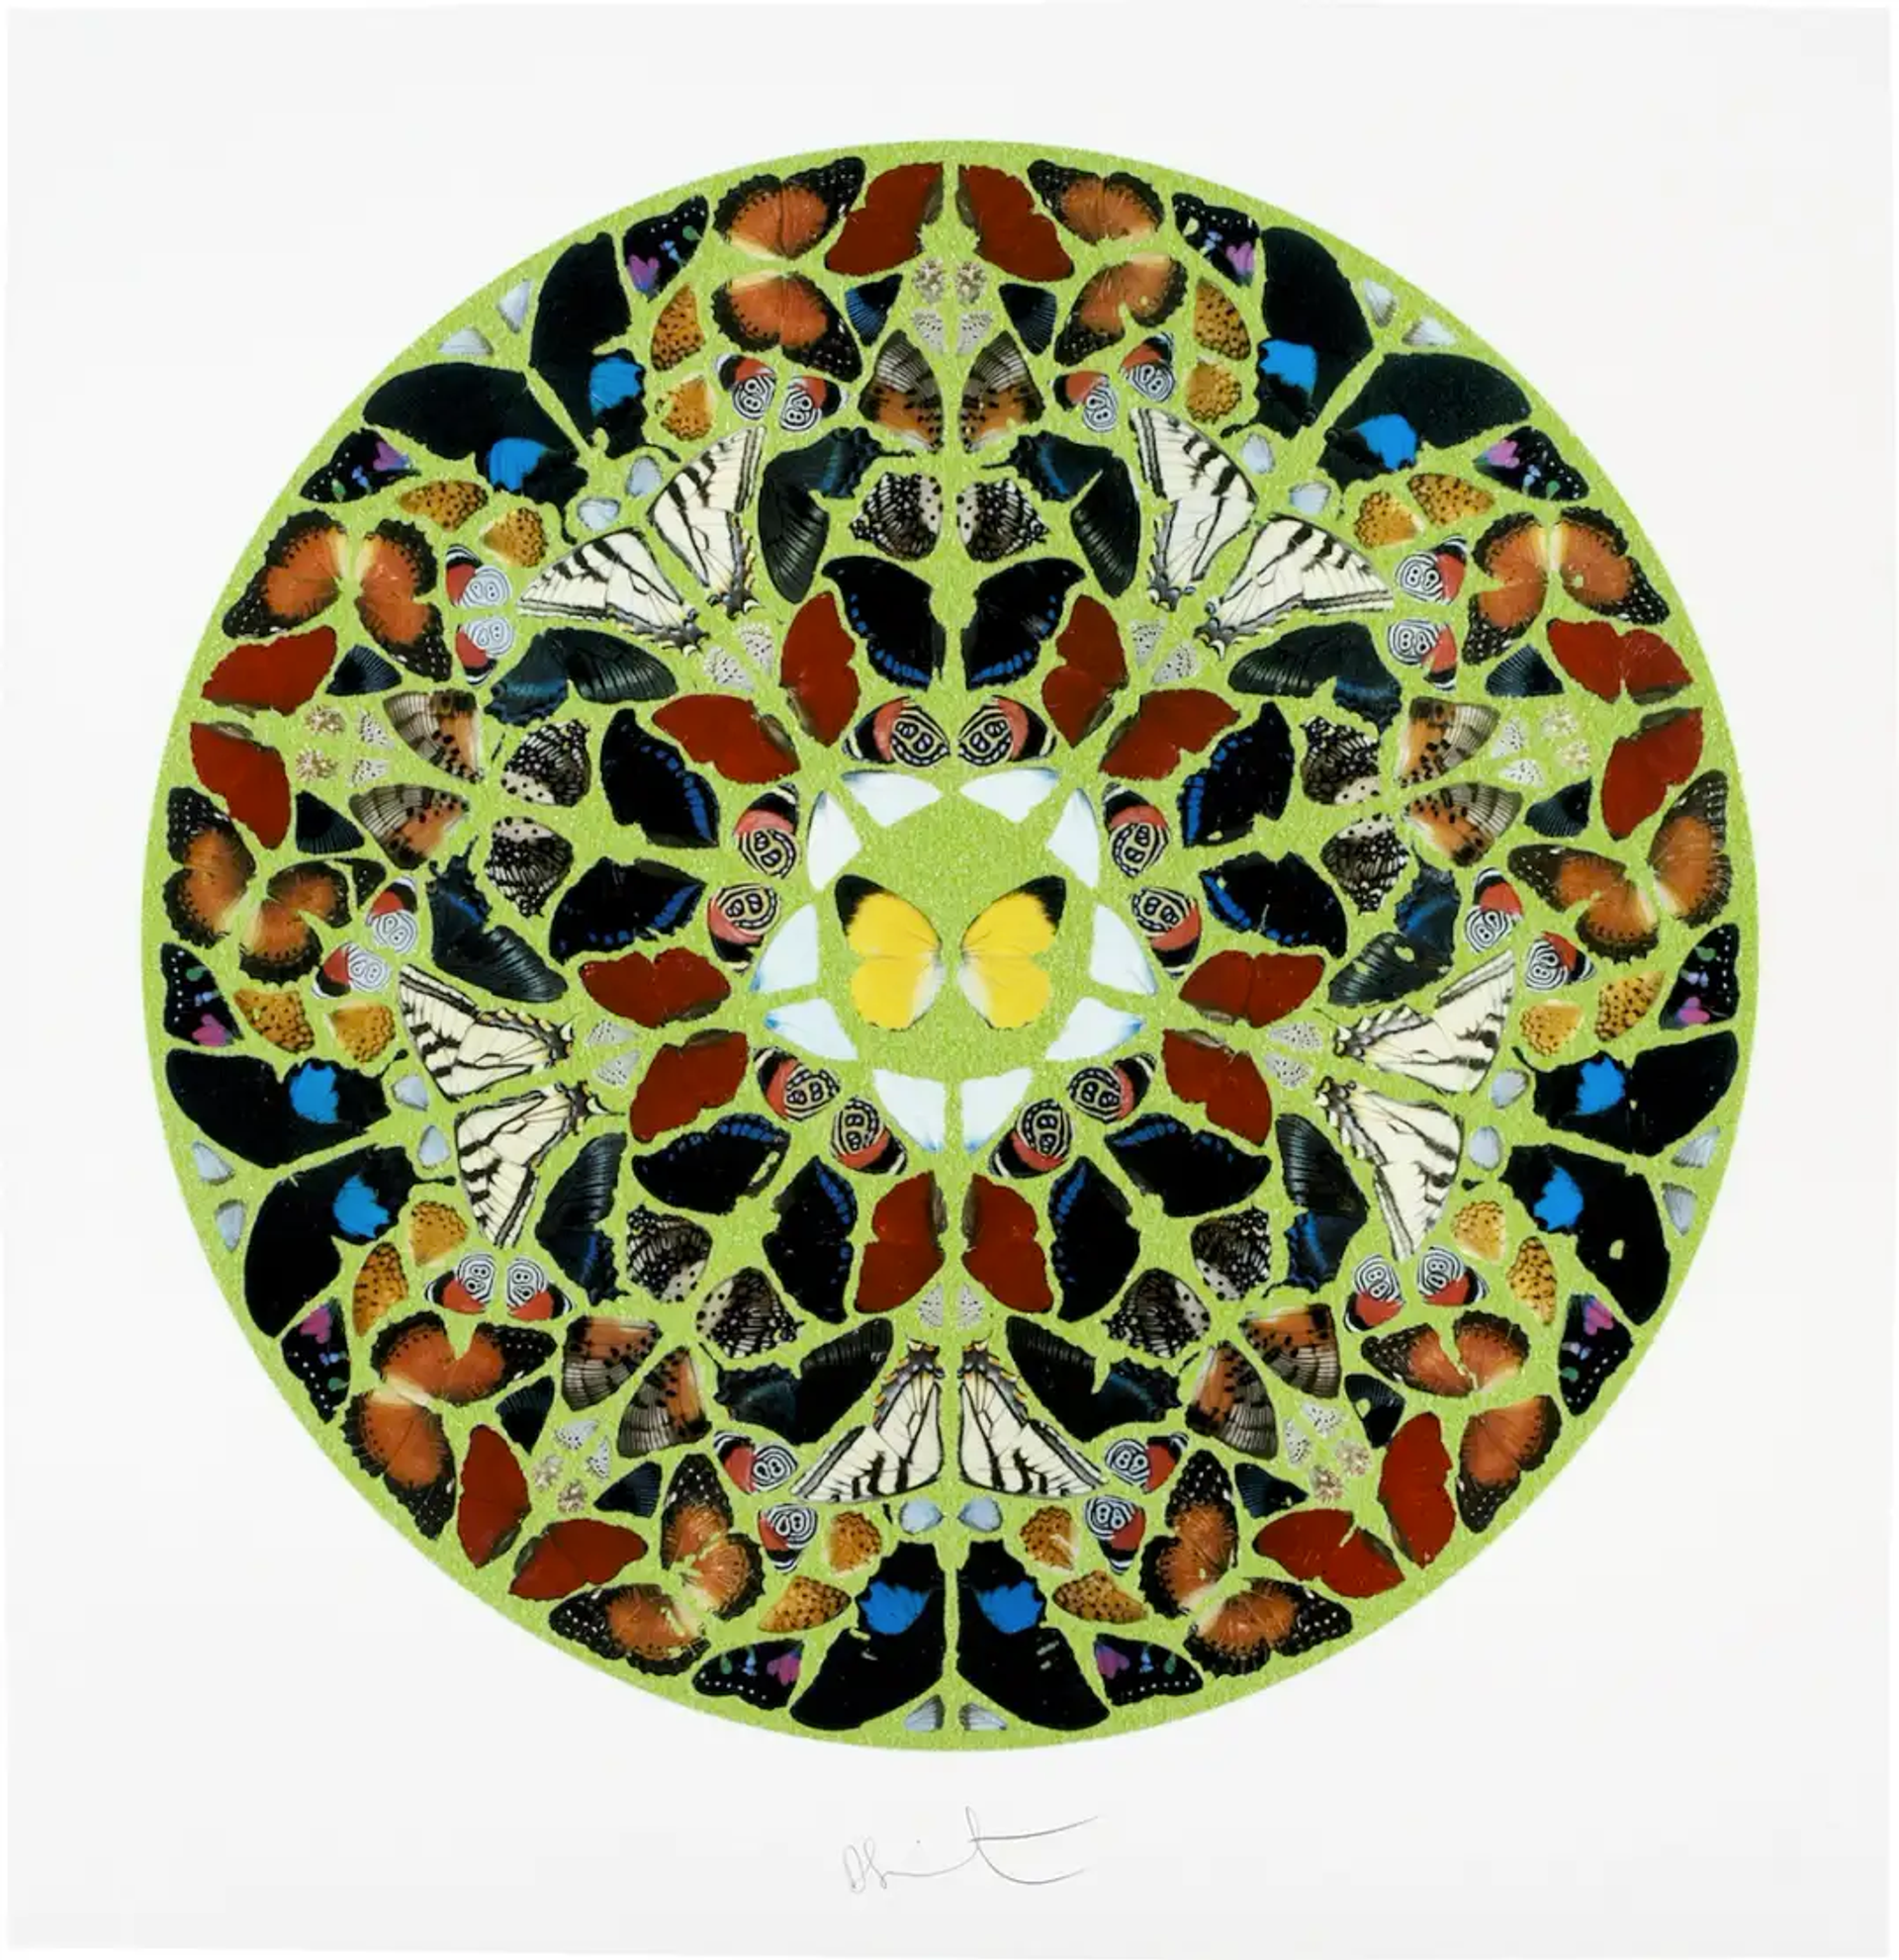 This print by Damien Hirst features an assortment of colourful butterfly wings arranged in a mandala pattern against a light green background.